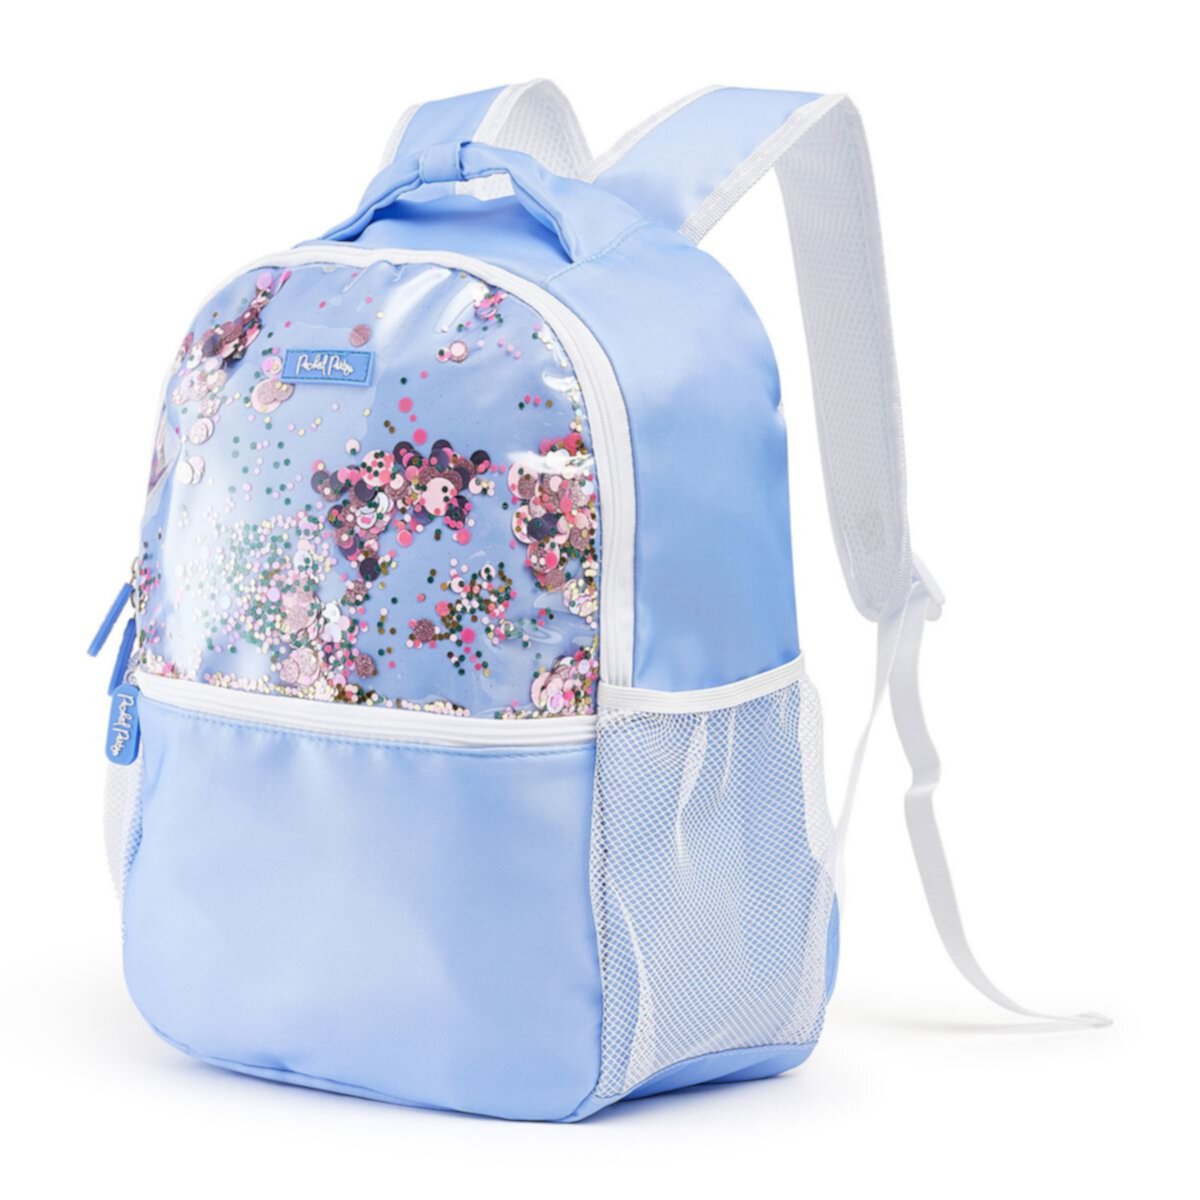 Packed Party Confetti Backpack Packed Party